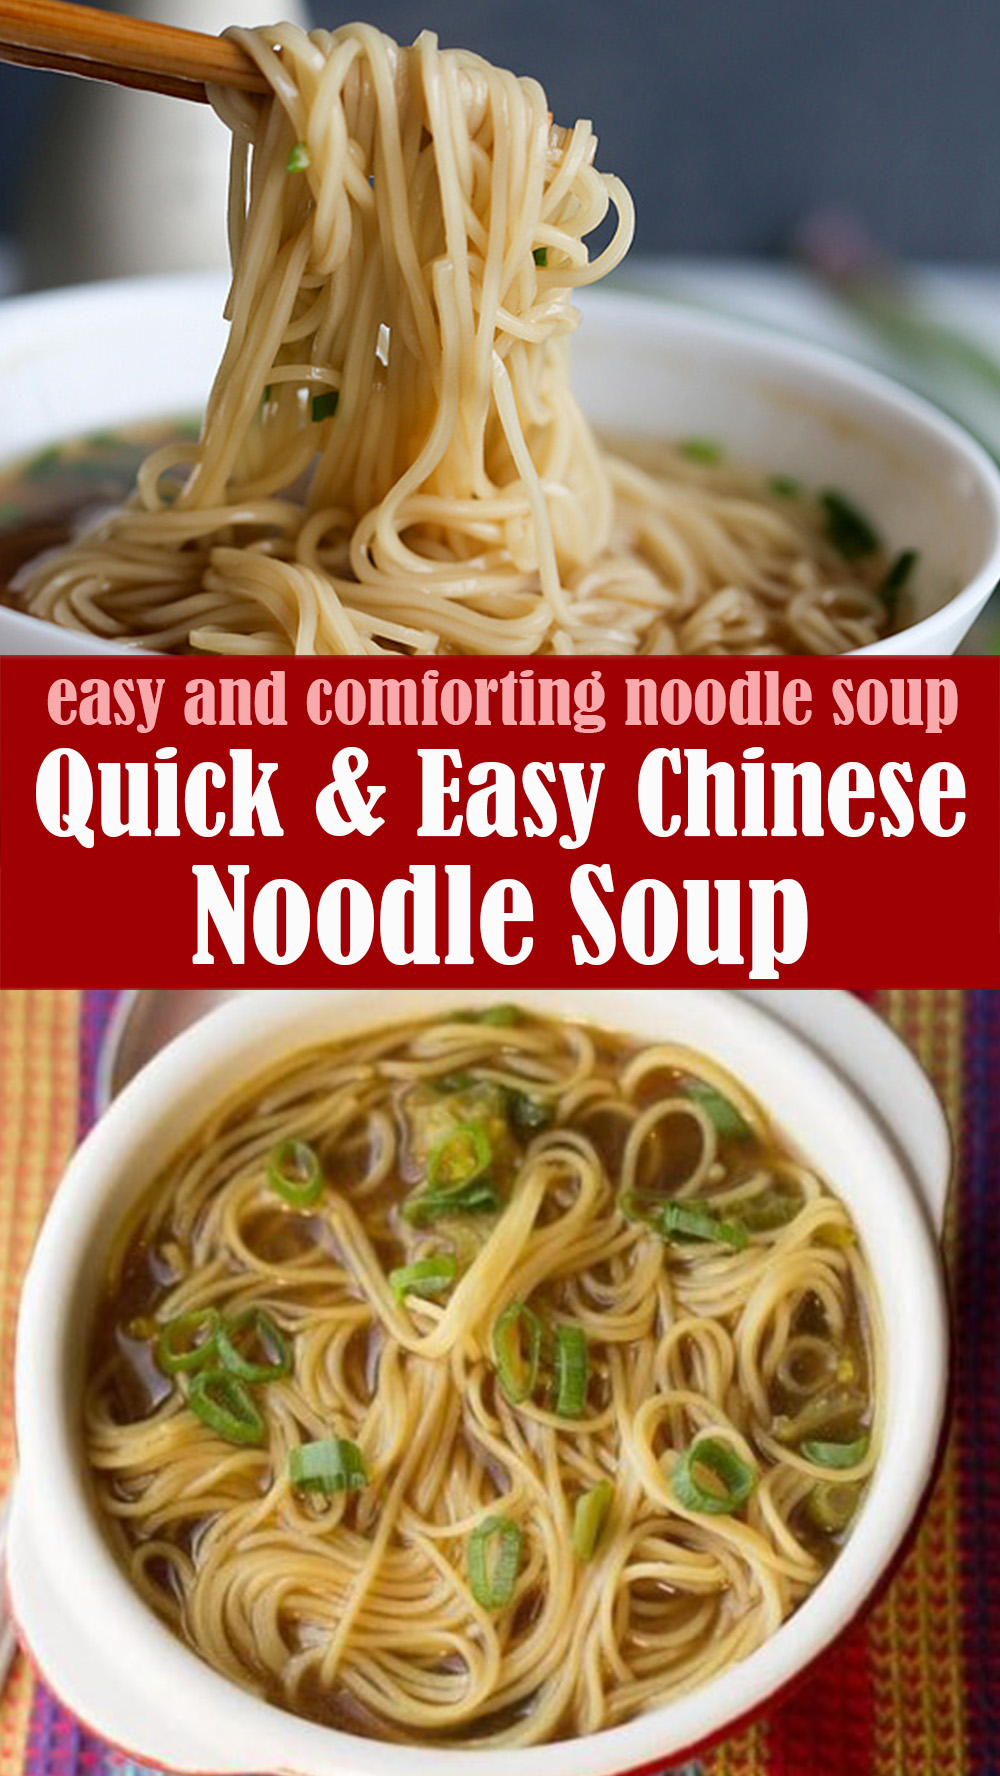 Easy and Delicious Chinese Noodle Soup